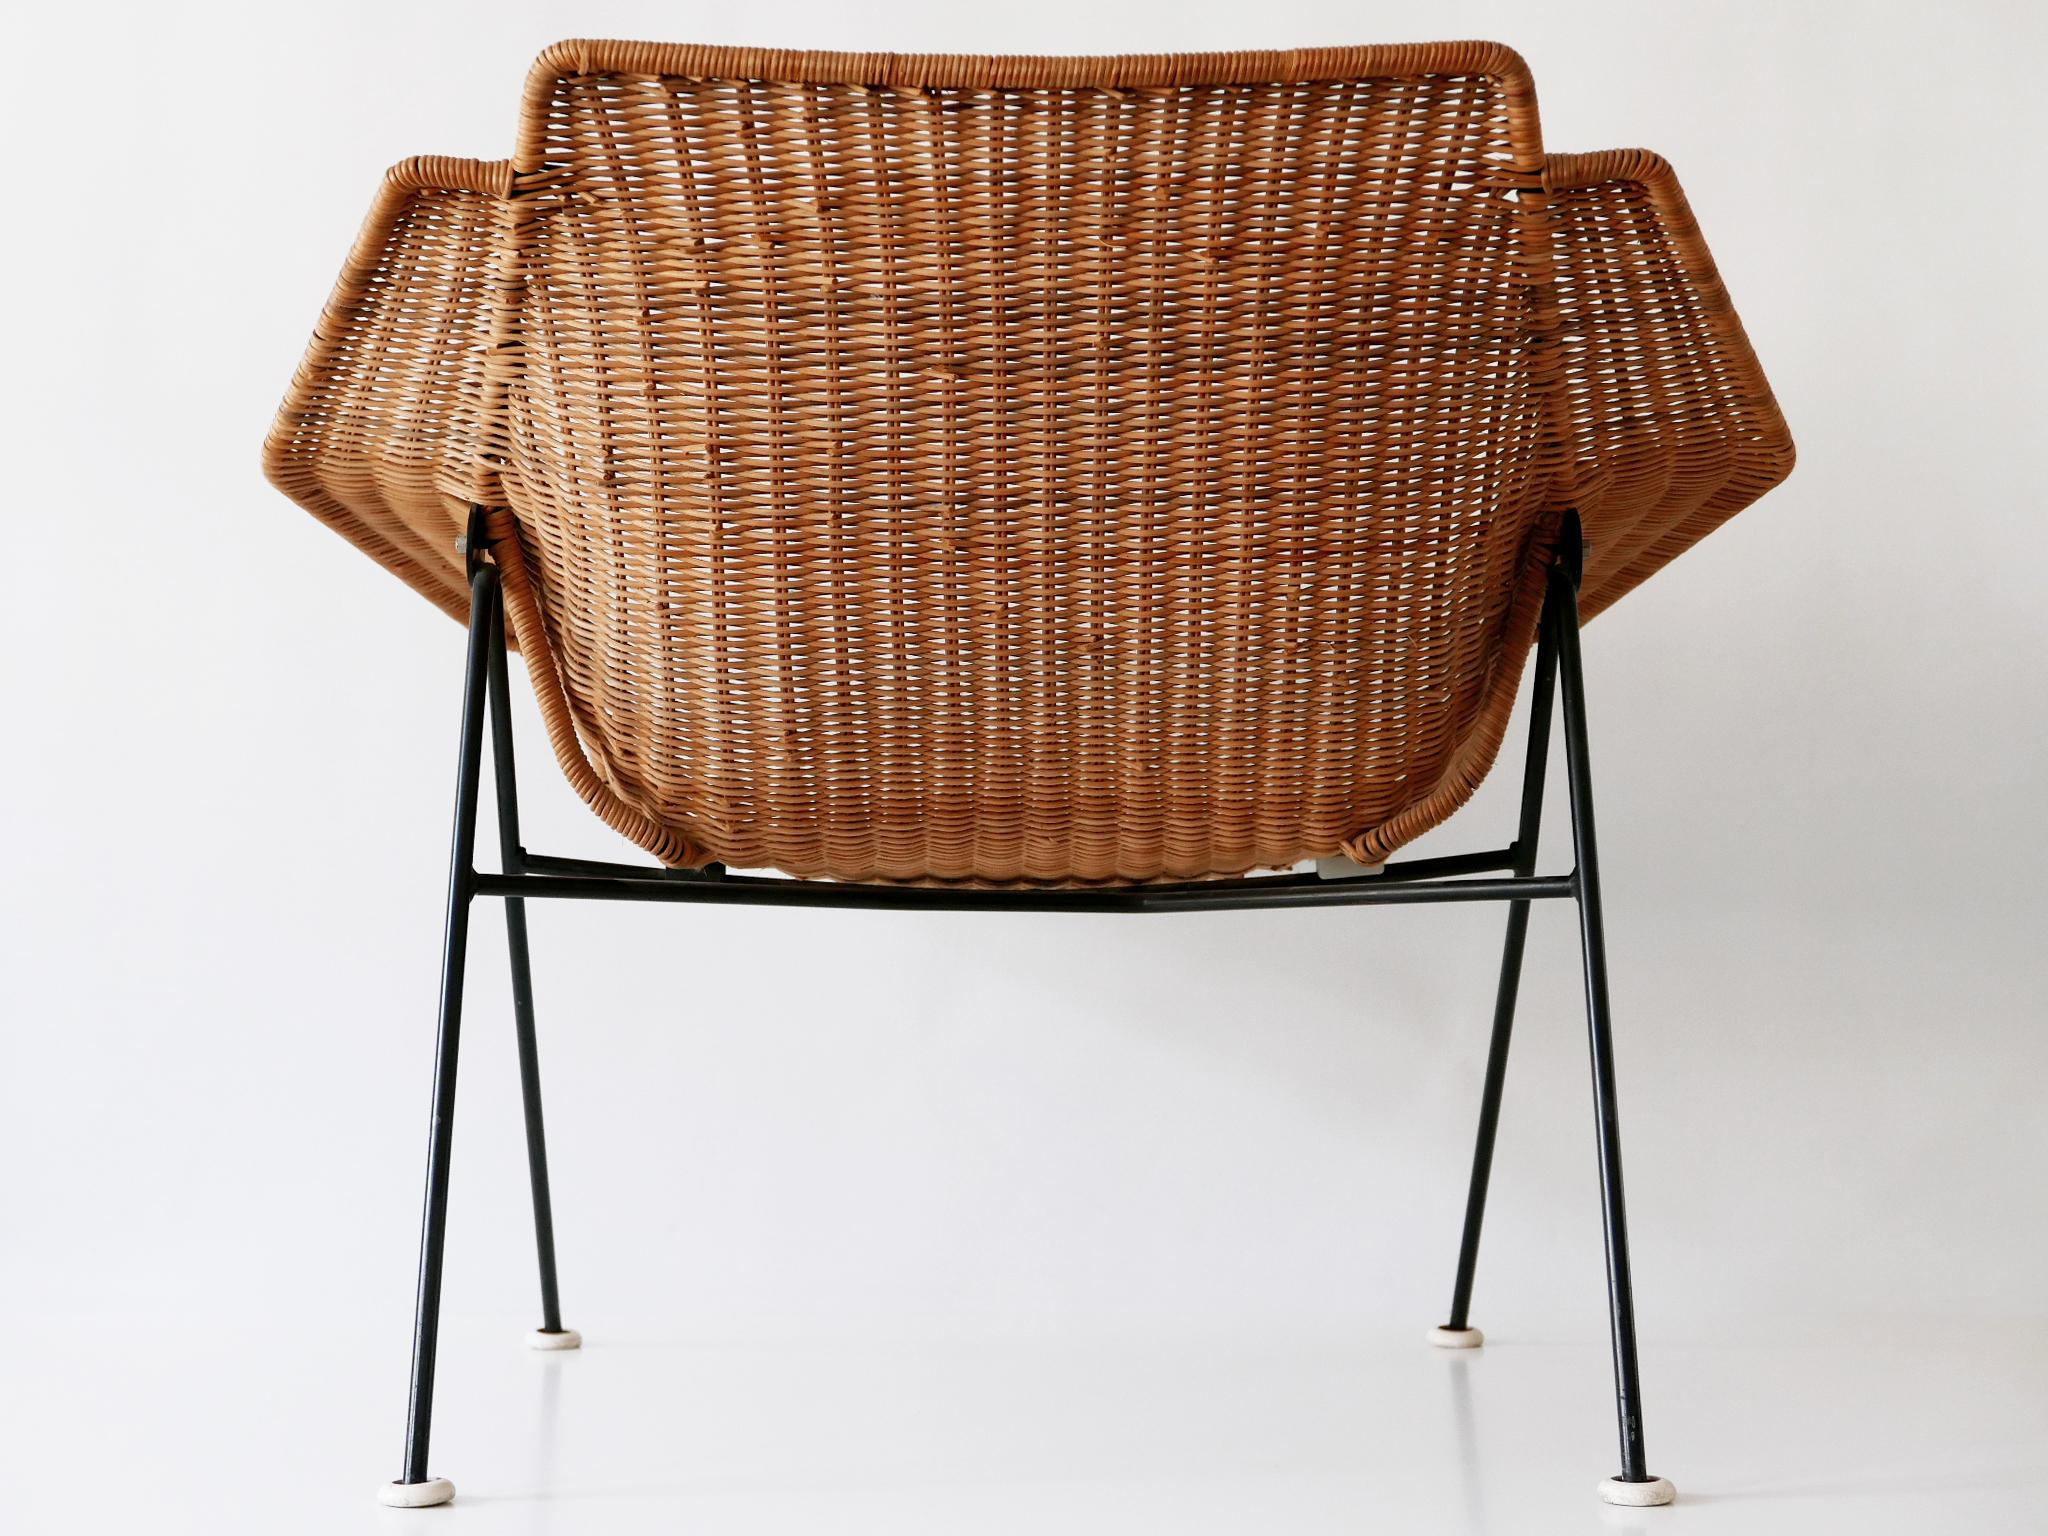 Exceptional Mid-Century Modern Wicker Lounge Chair or Armchair 1950s Sweden For Sale 2